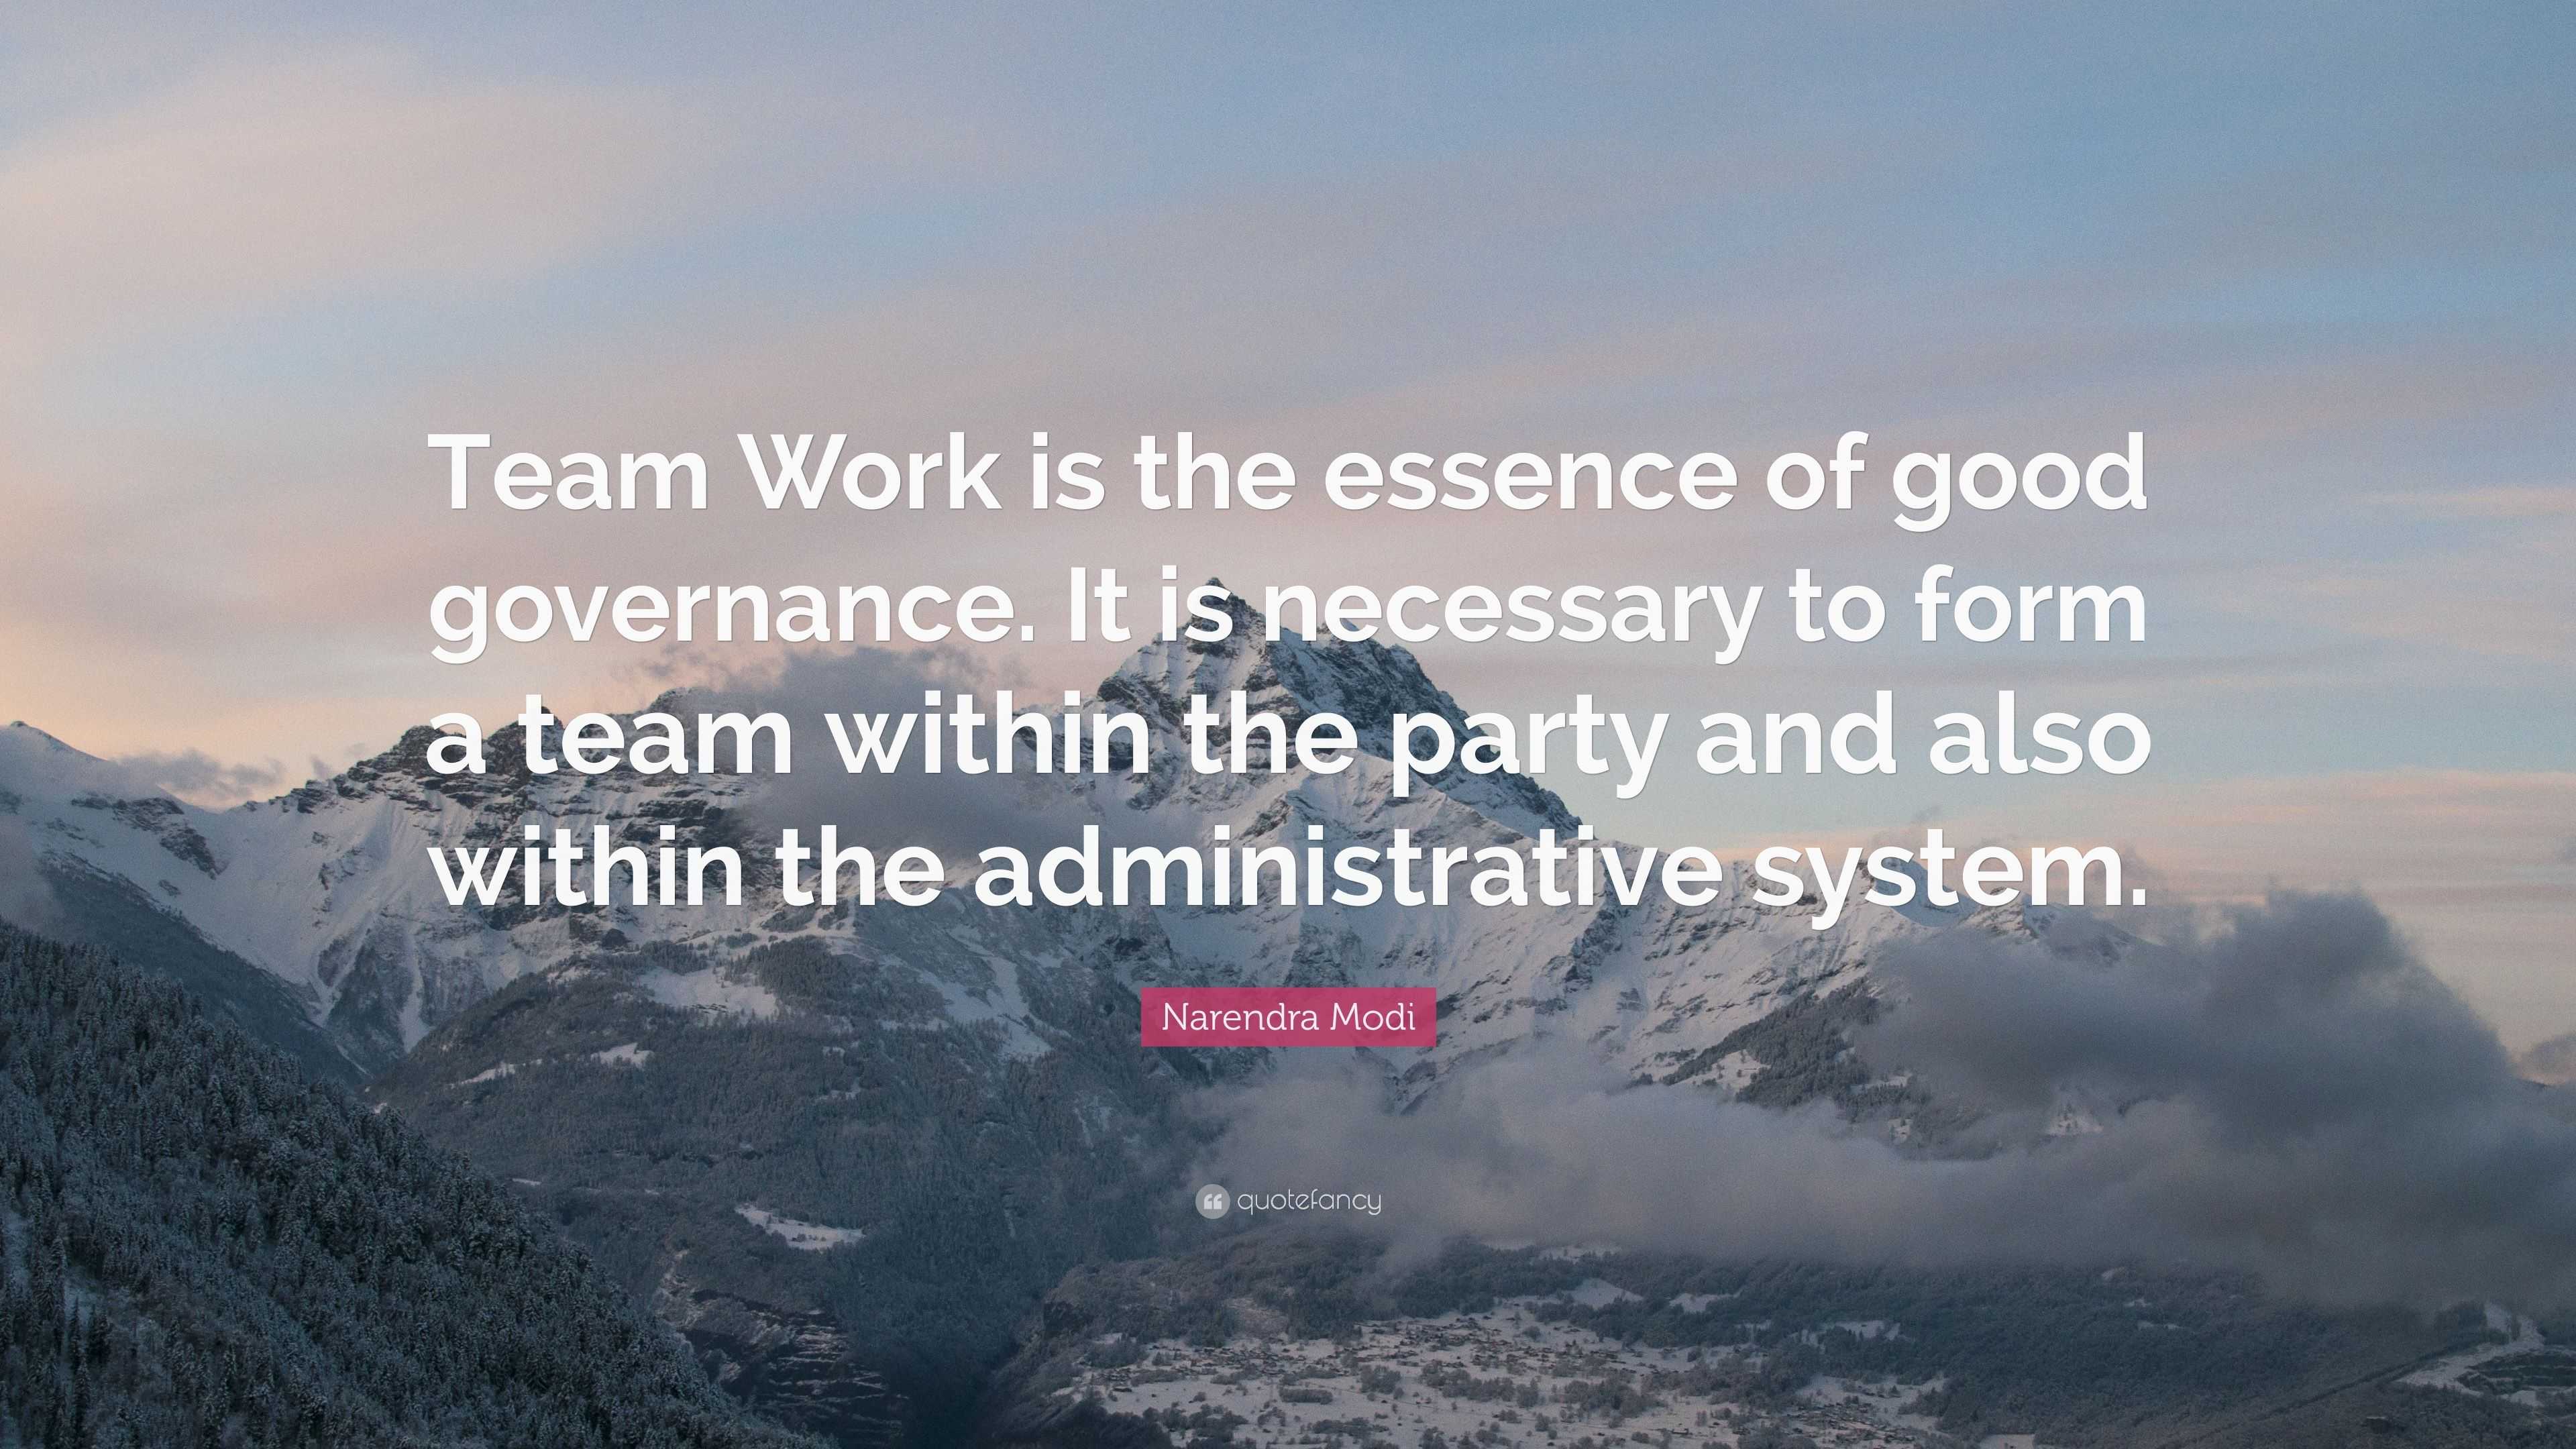 Narendra Modi Quote: “Team Work is the essence of good governance. It ...